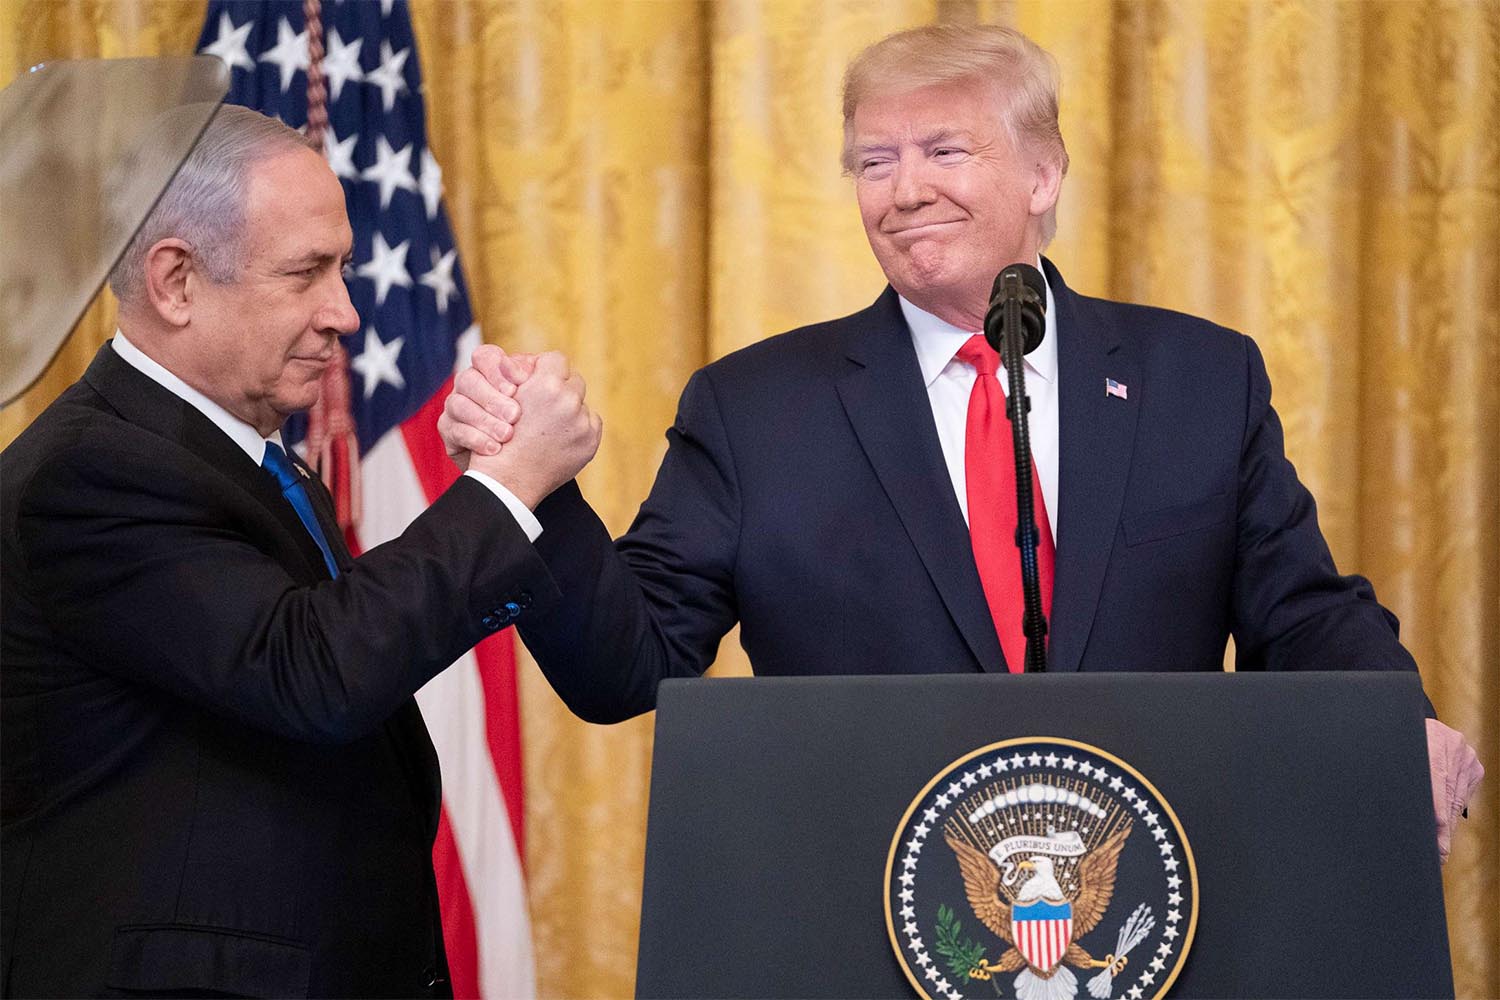 Israeli Prime Minister Benjamin Netanyahu and US President Donald Trump hold hands at the end of a joint press conference to announce the US' Middle East peace plan proposal